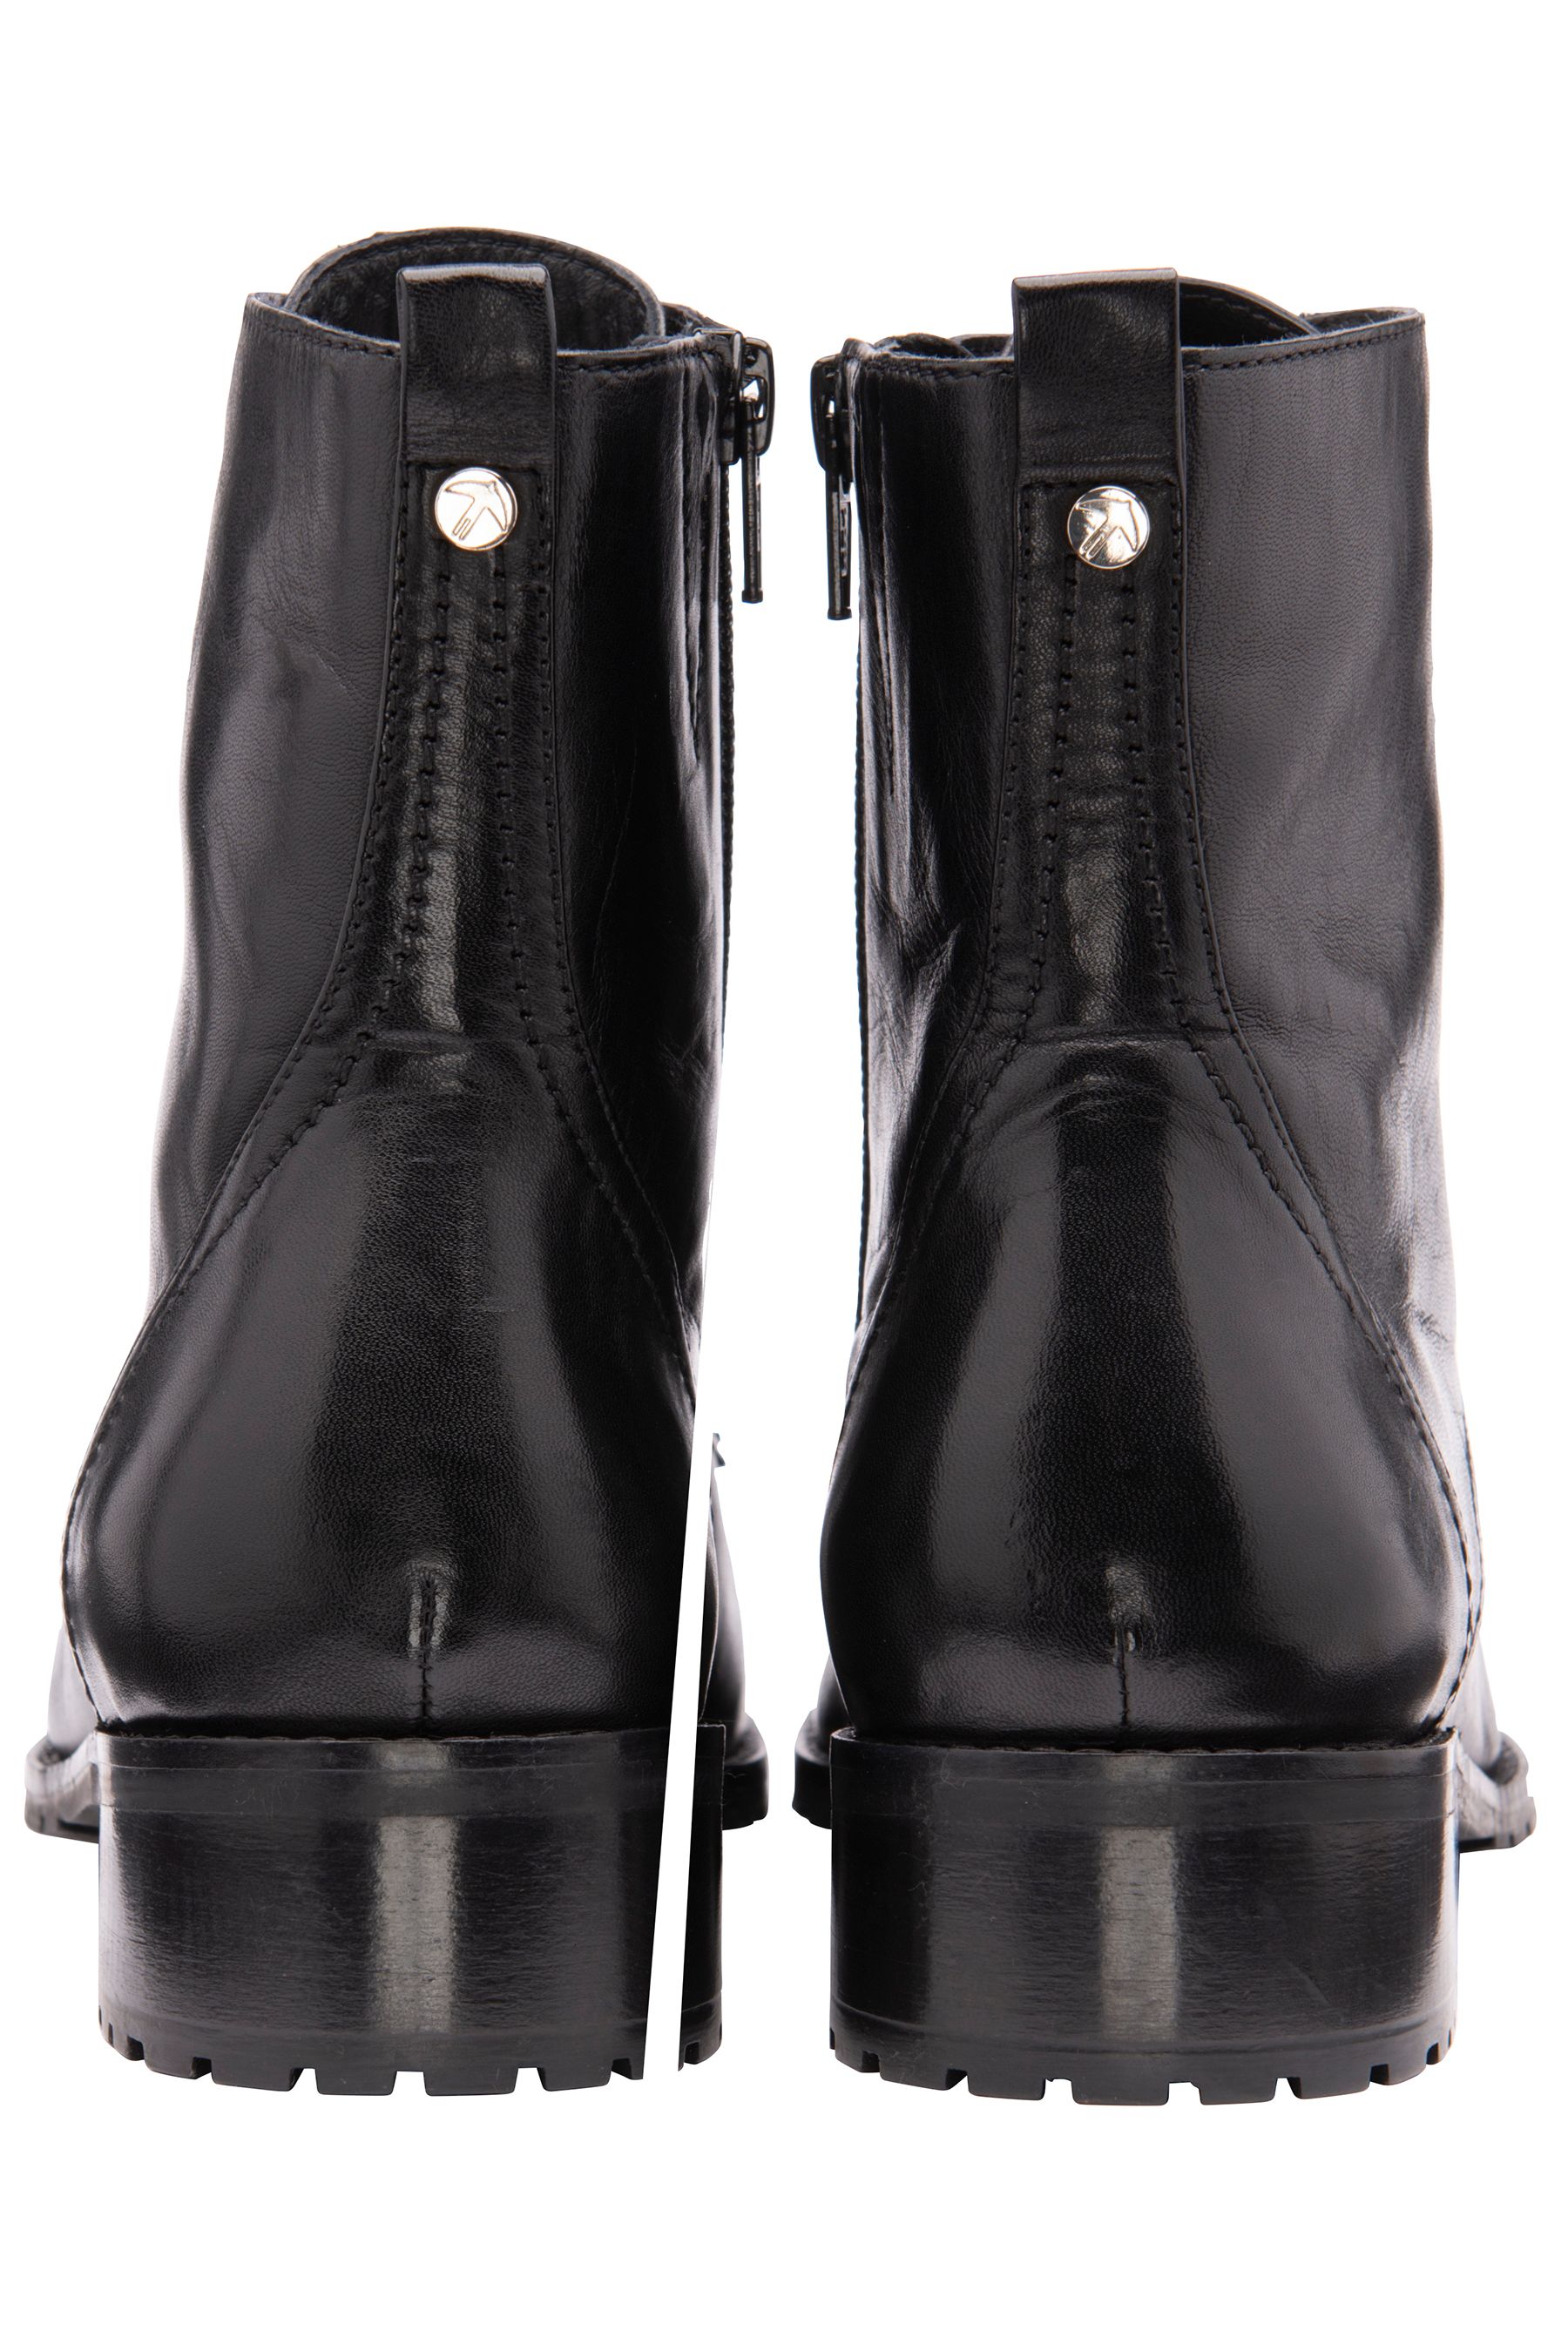 Buy Ravel Black Leather Ankle Boot from the Next UK online shop